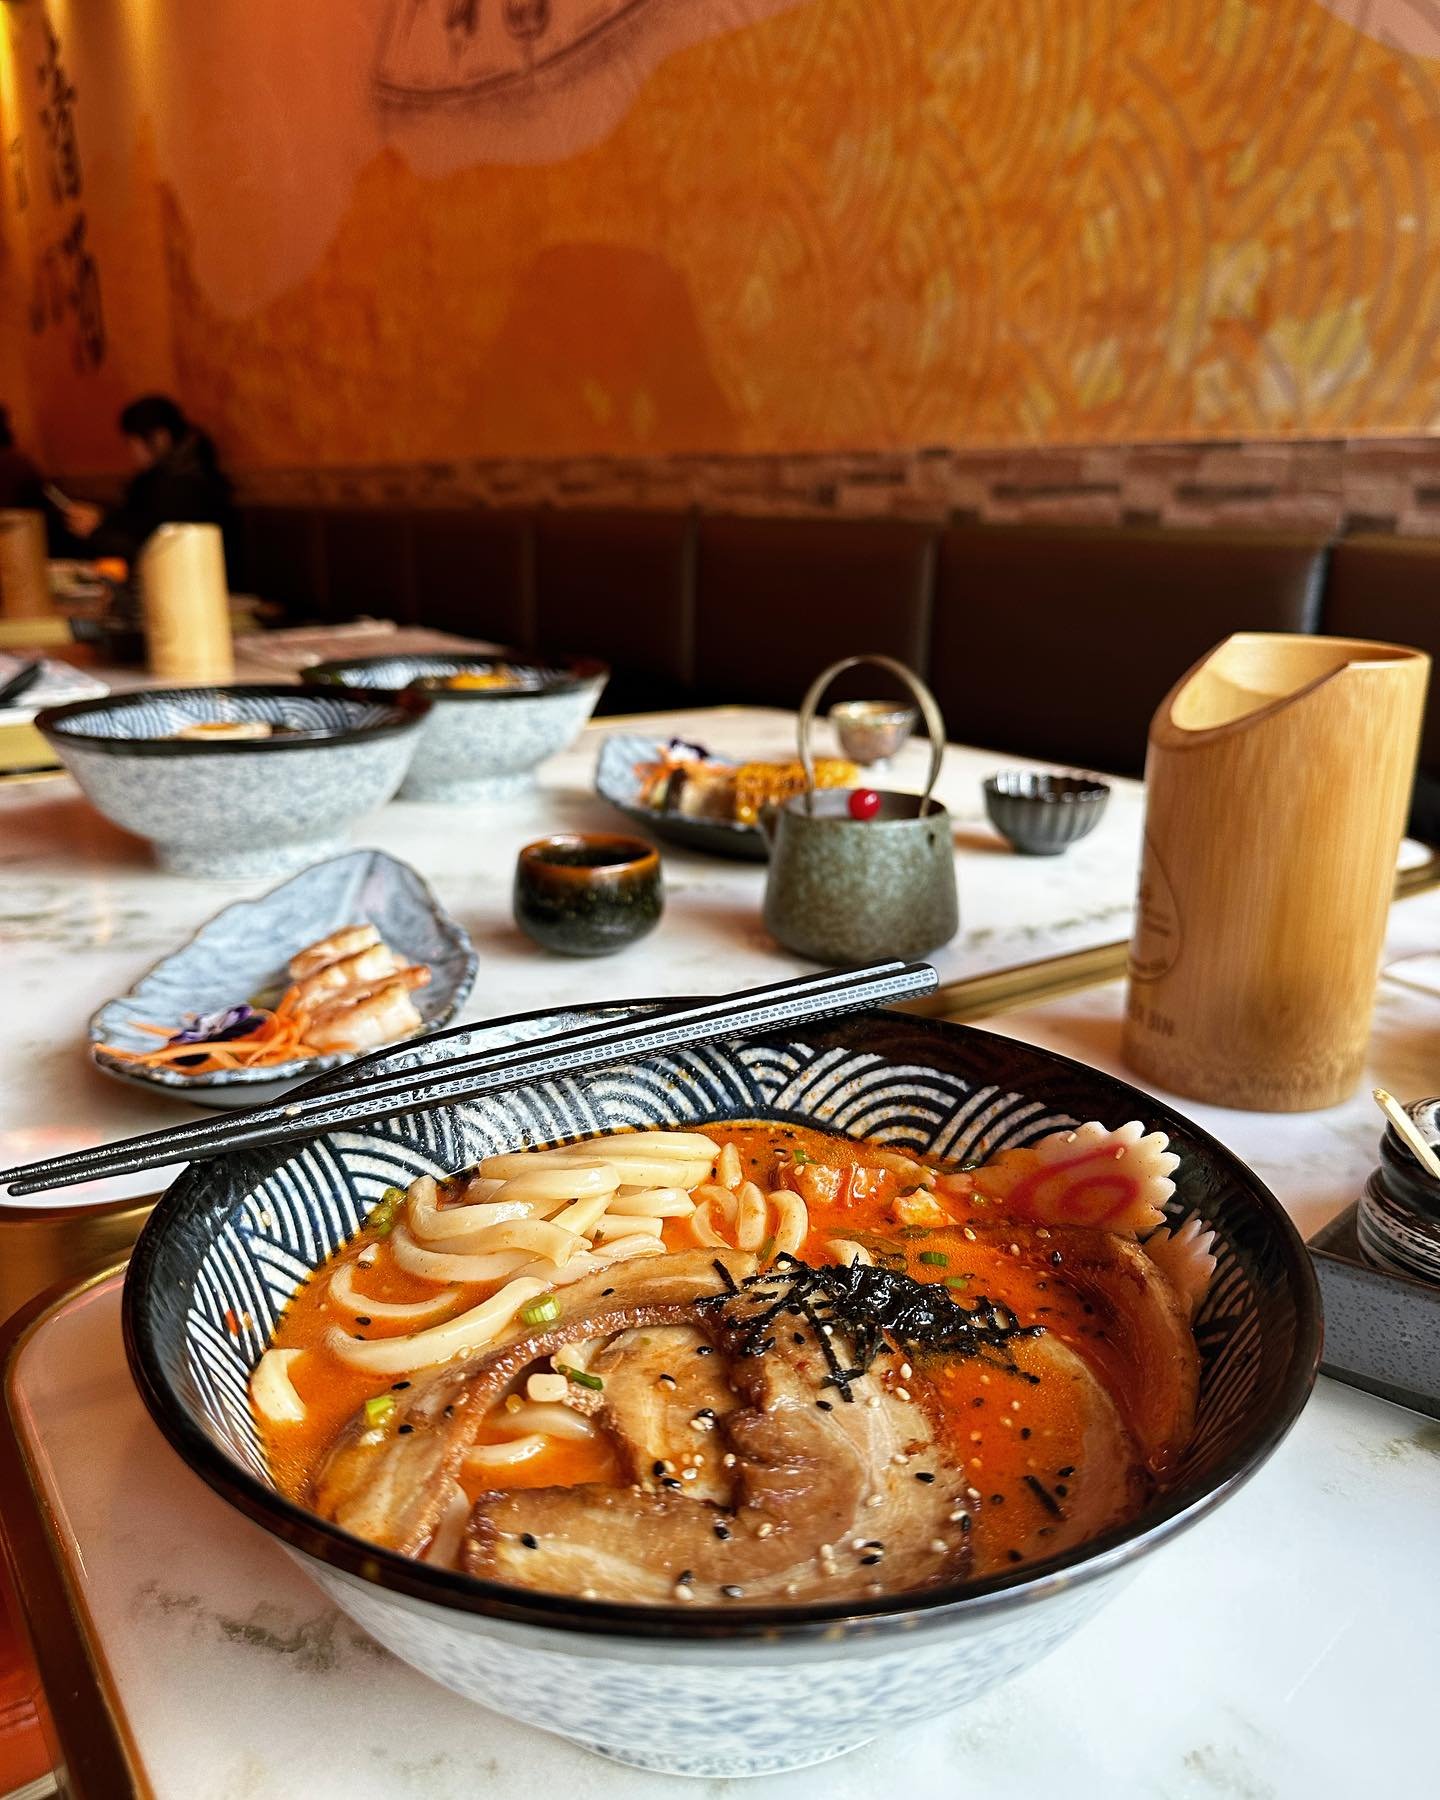 🌸 Embrace the Spring Friday Vibes at Hope Izakaya! 🌸

Let&rsquo;s welcome the weekend with open arms and positive energy at Hope Izakaya! Join us for an evening filled with good times, delicious ramen, and uplifting vibes that will lift your spirit